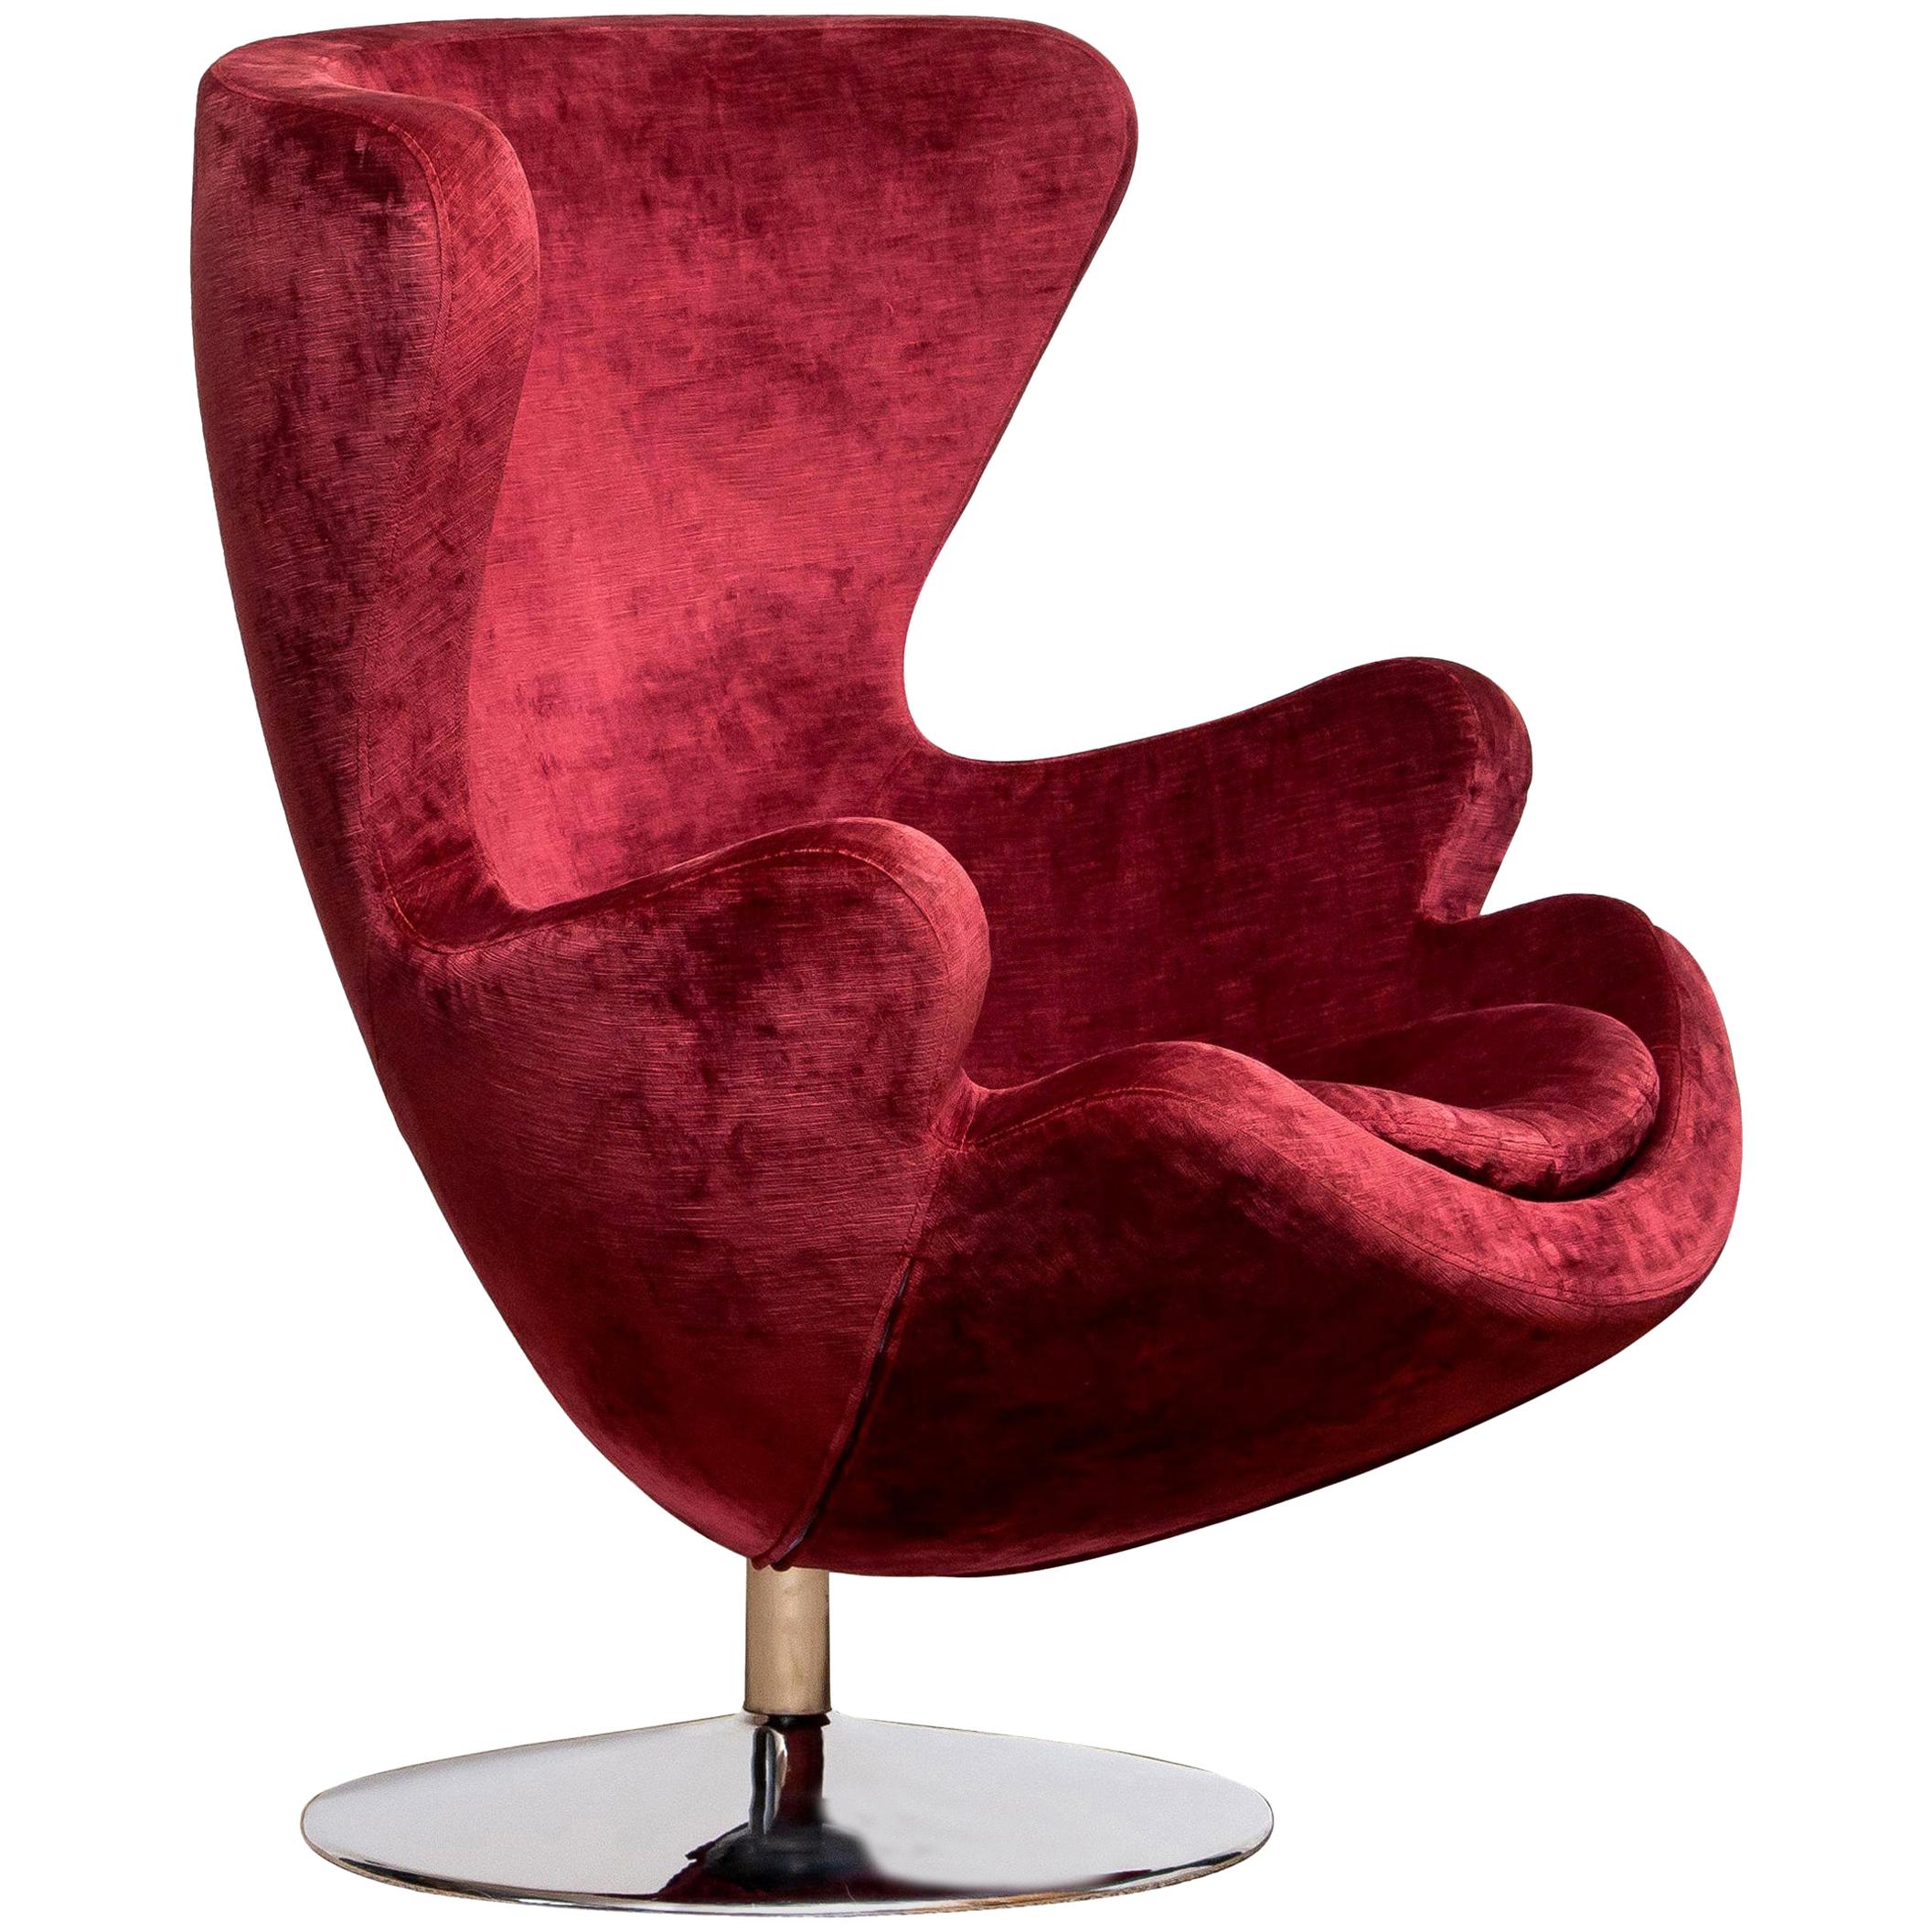 1970s Swivel Lounge Egg Chair on Chrome Stand Colored in Bordeaux Red Baby Roy